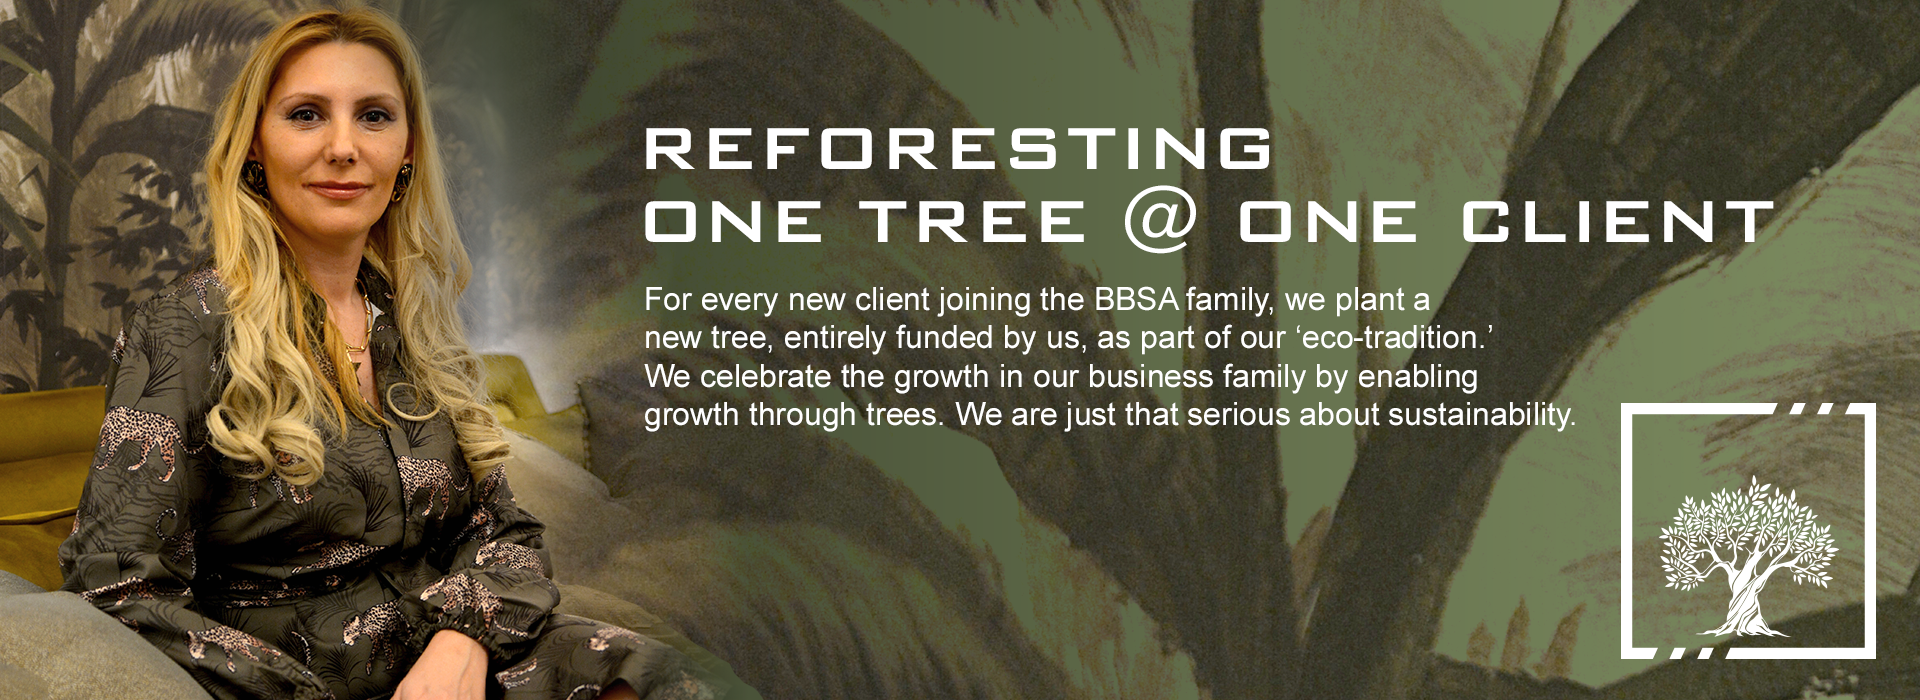 Reforesting one tree at one client